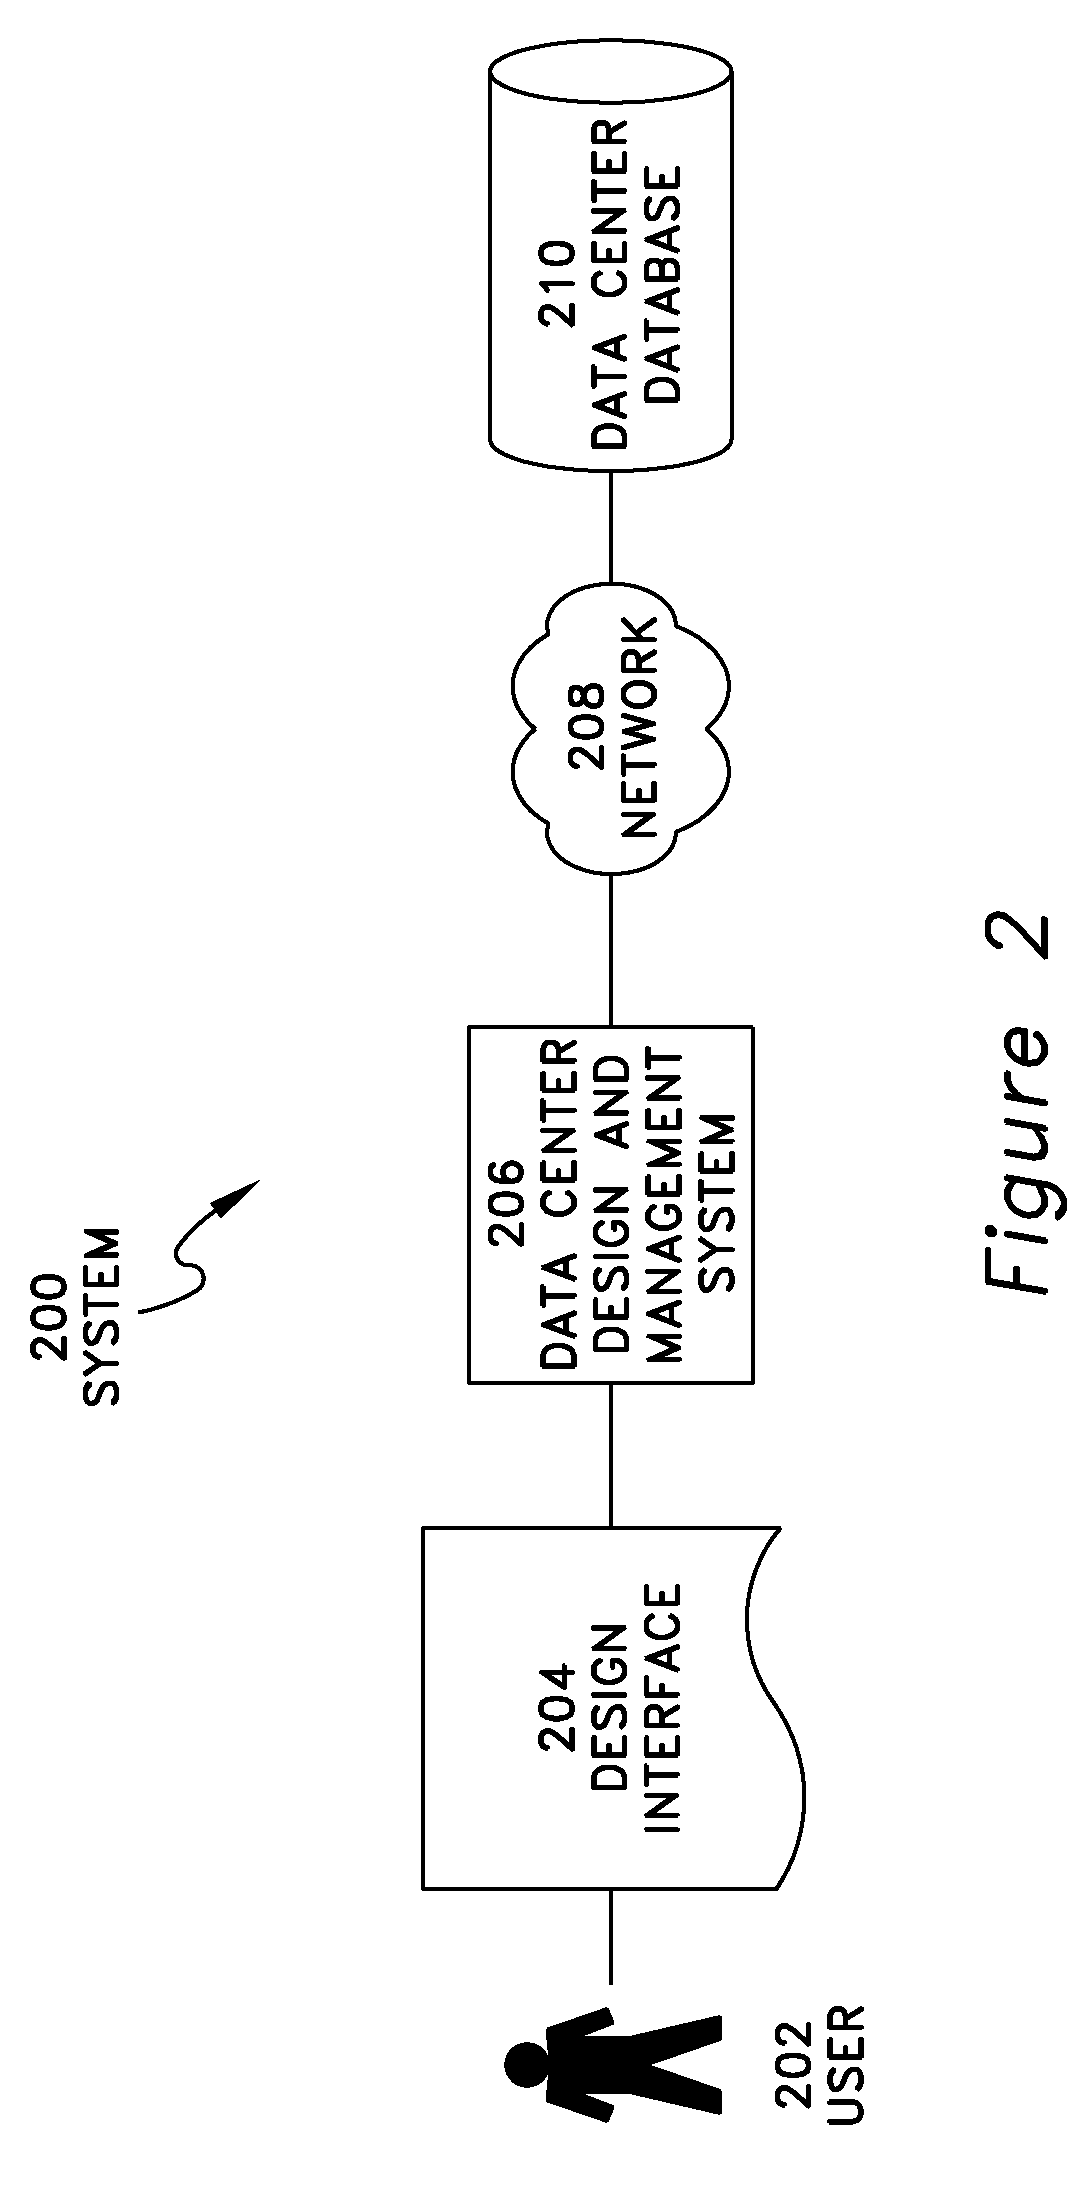 System and method for assessing and managing data center airflow and energy usage